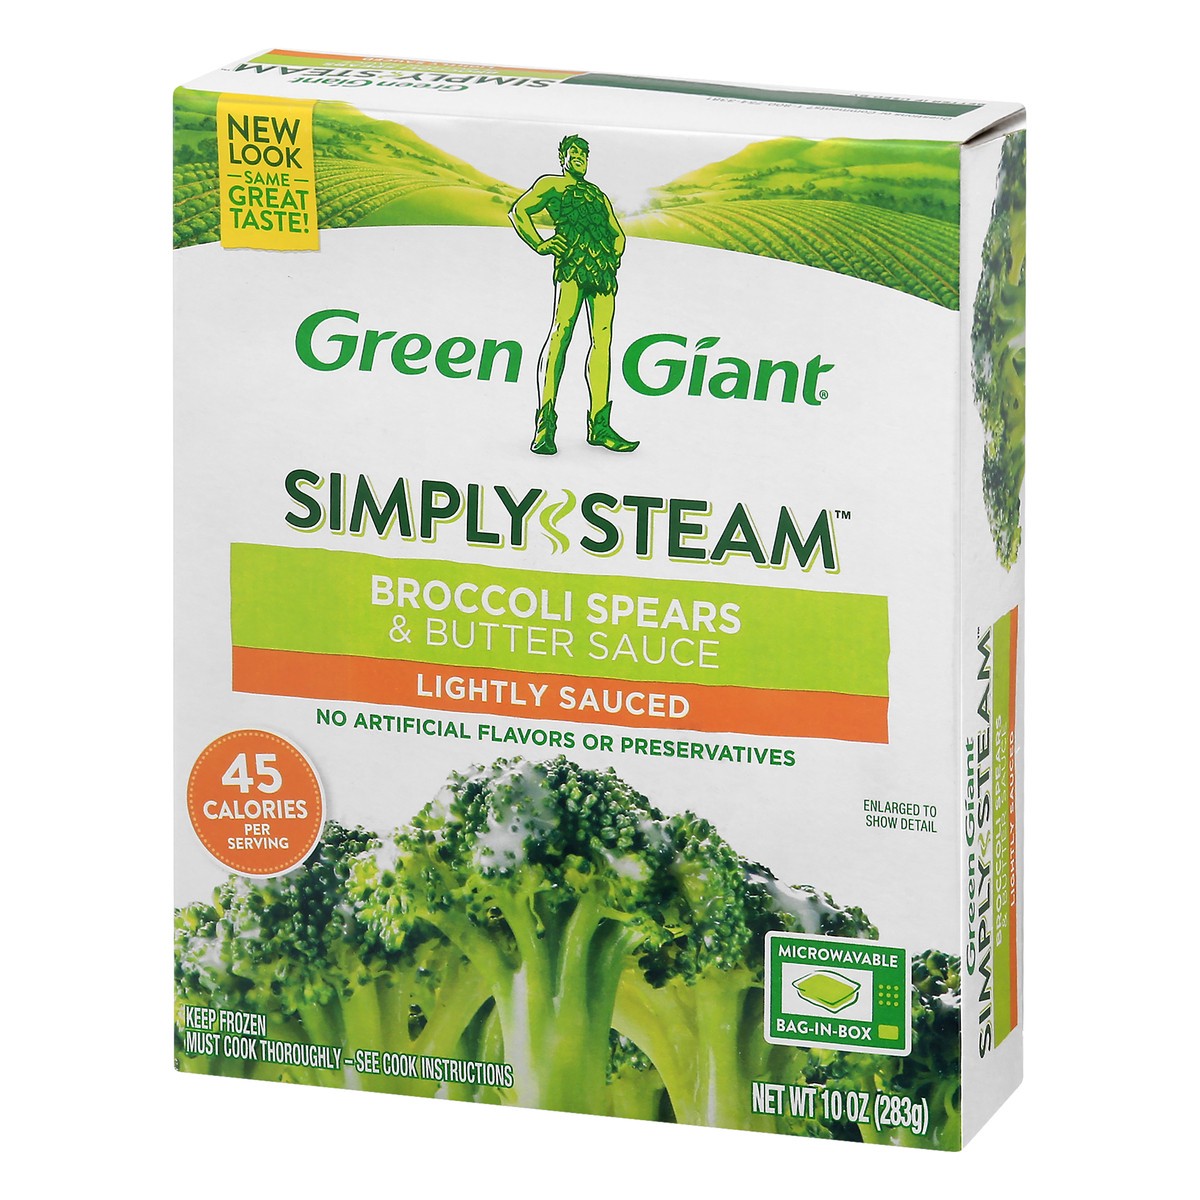 slide 5 of 11, Green Giant Simply Steam Lightly Sauced Broccoli Spears & Butter Sauce 10 oz, 10 oz